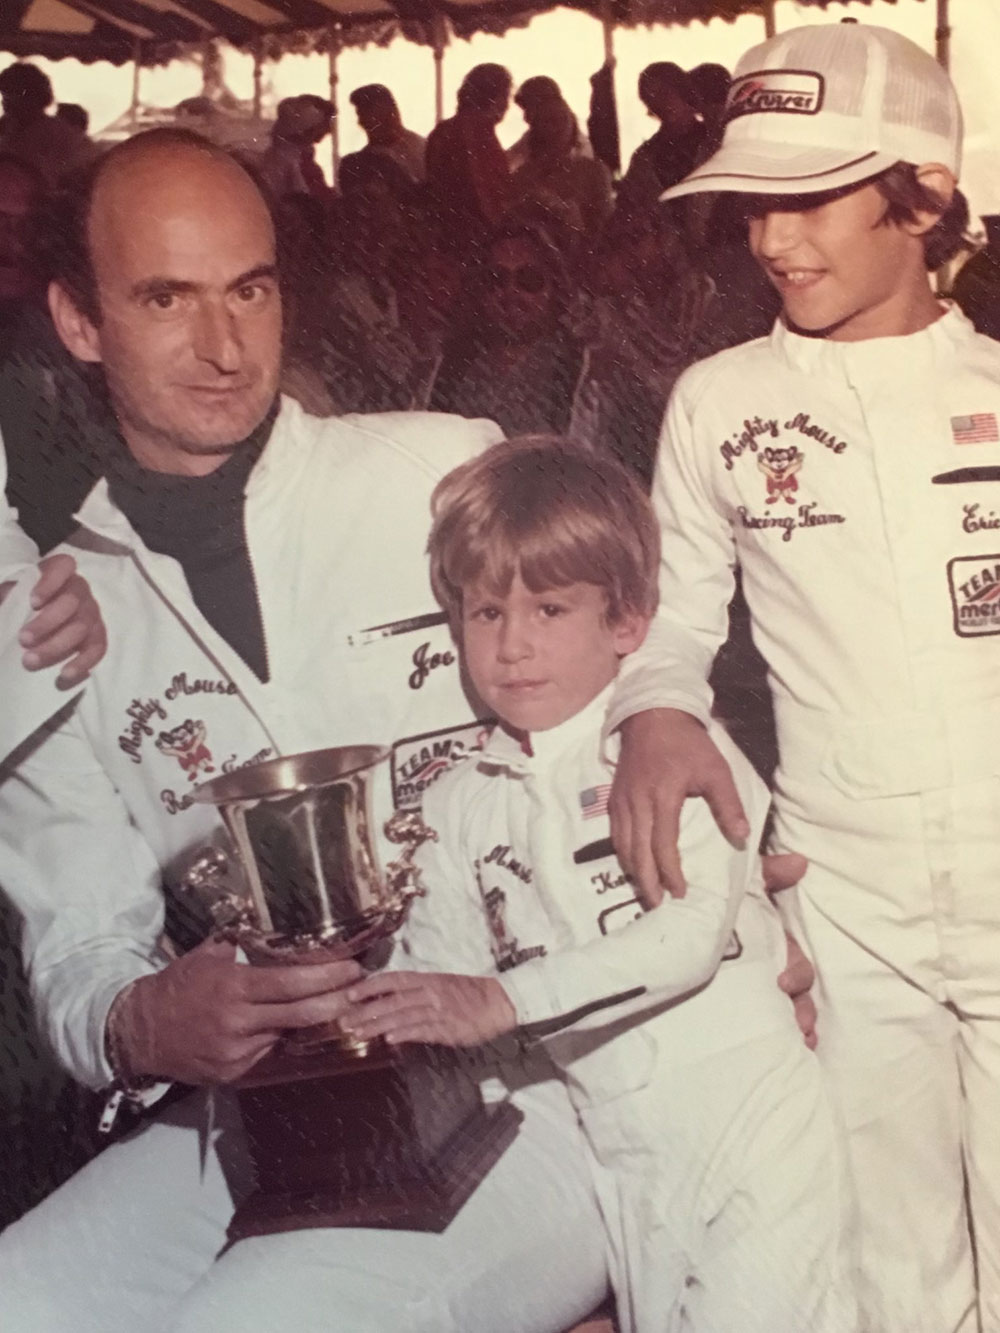 3 my father, little brother and me at a race won